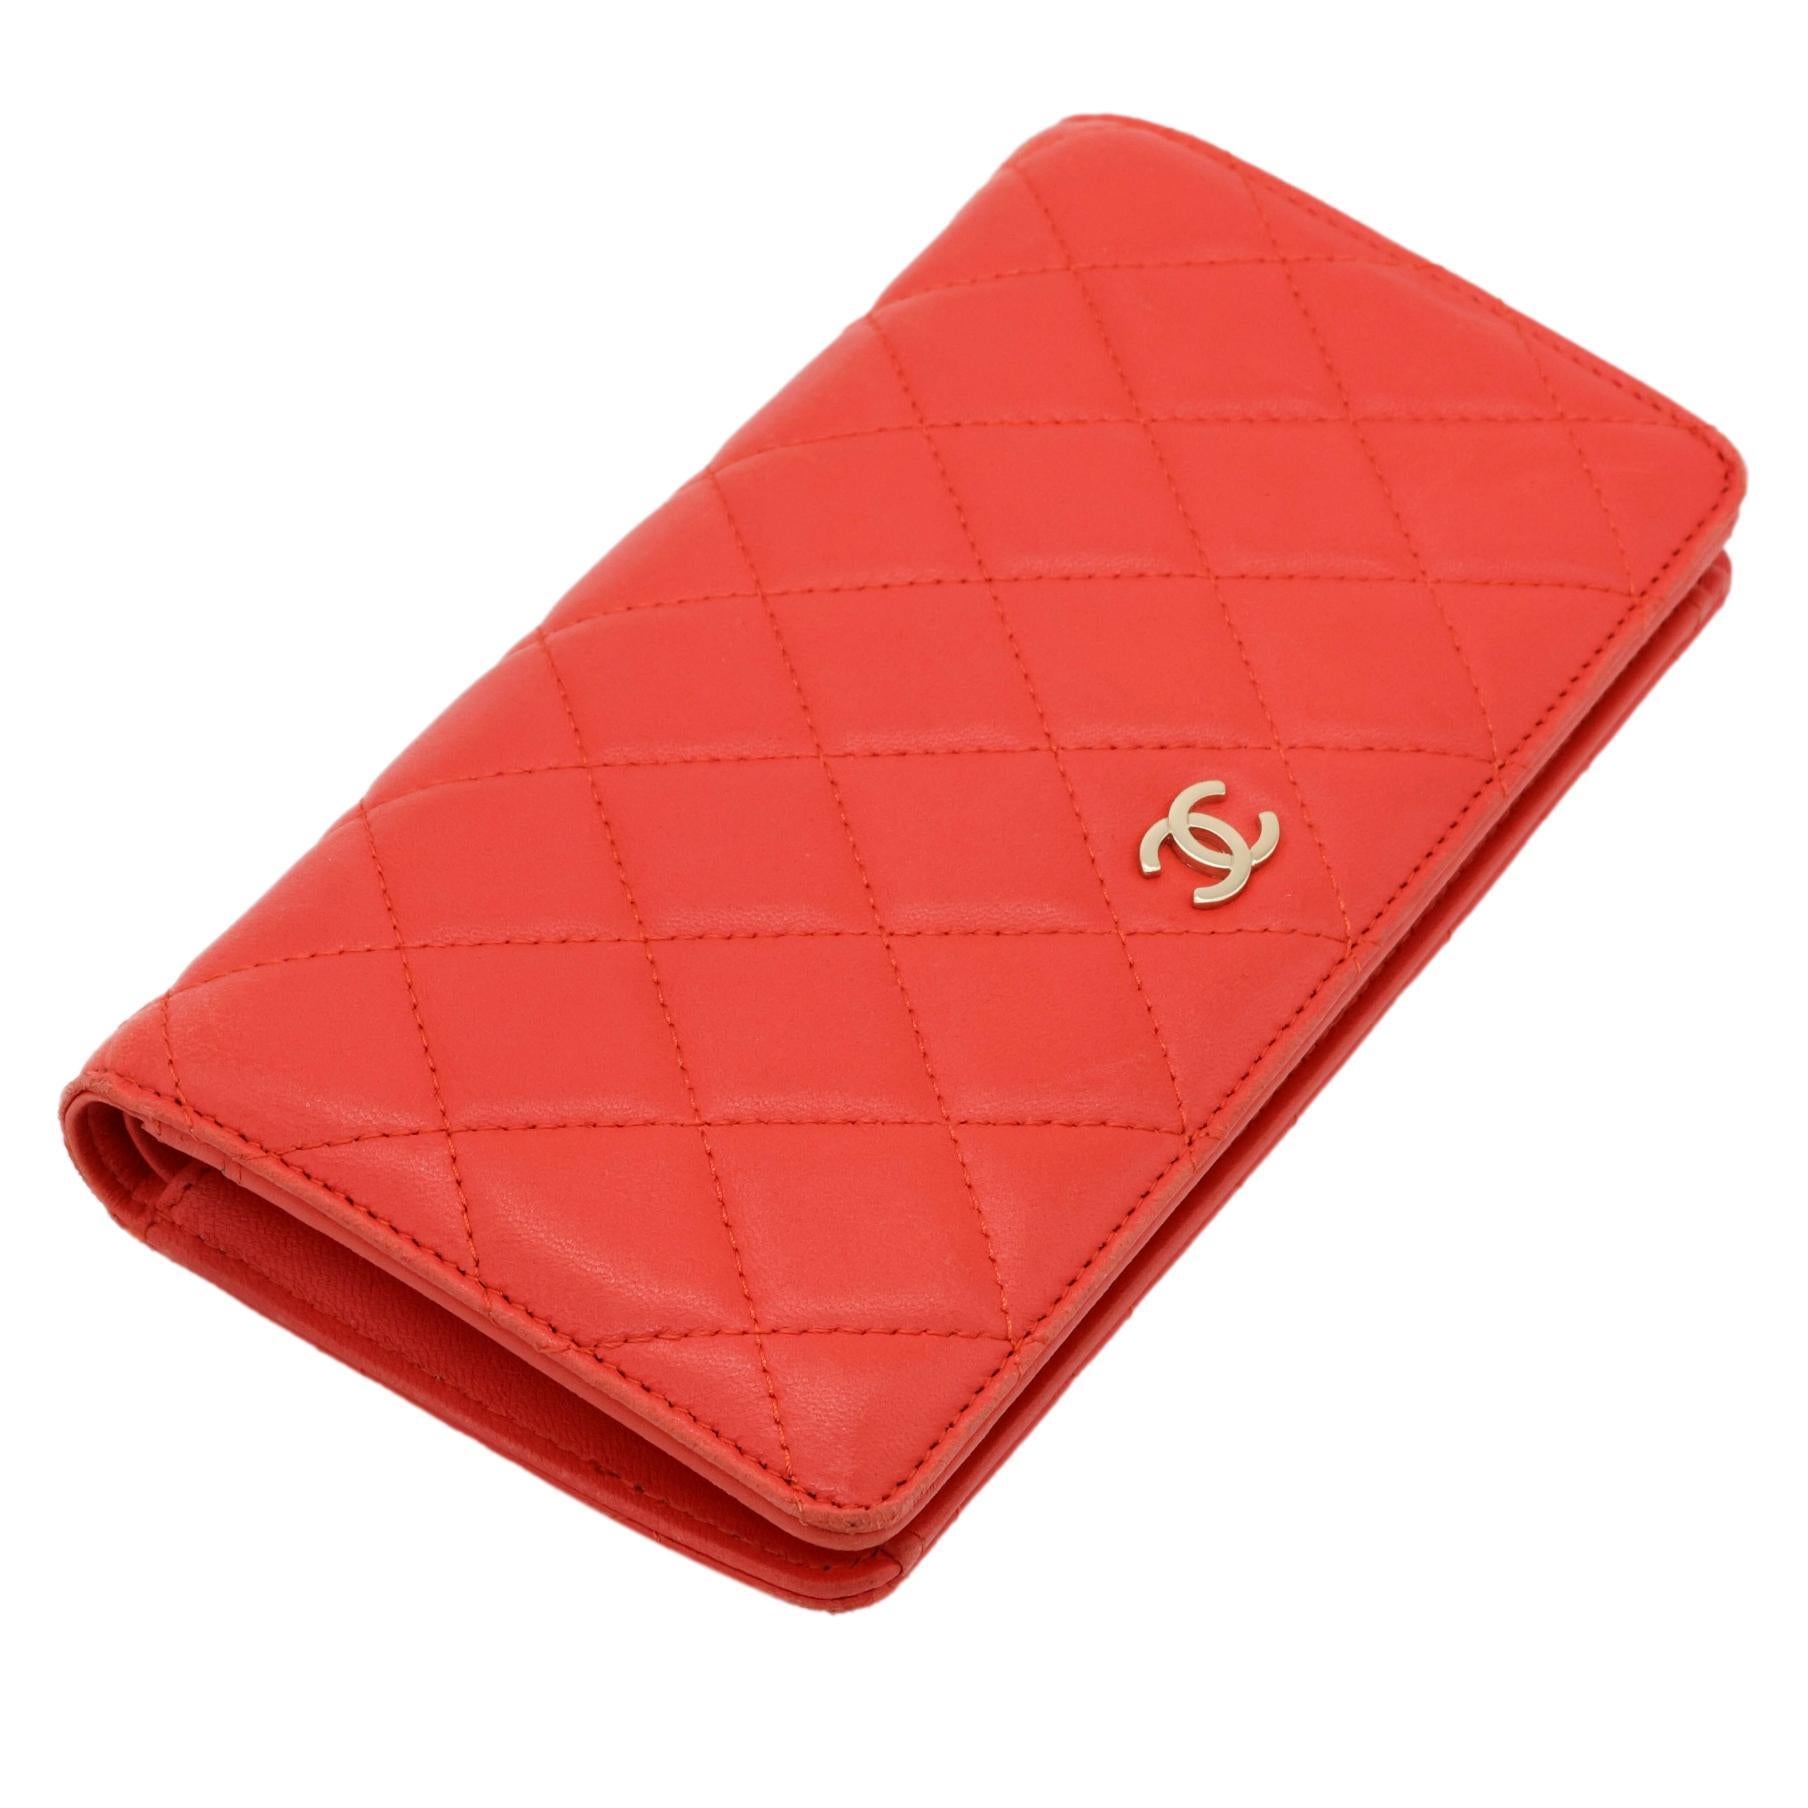 Chanel Quilted Coral Lambskin Leather Yen Continental Wallet, 2009 - 2010. Exceptionally made, this highly sought after and popular piece was produced between 2009 - 2010 under the direction of Karl Lagerfeld baring a serial code of 